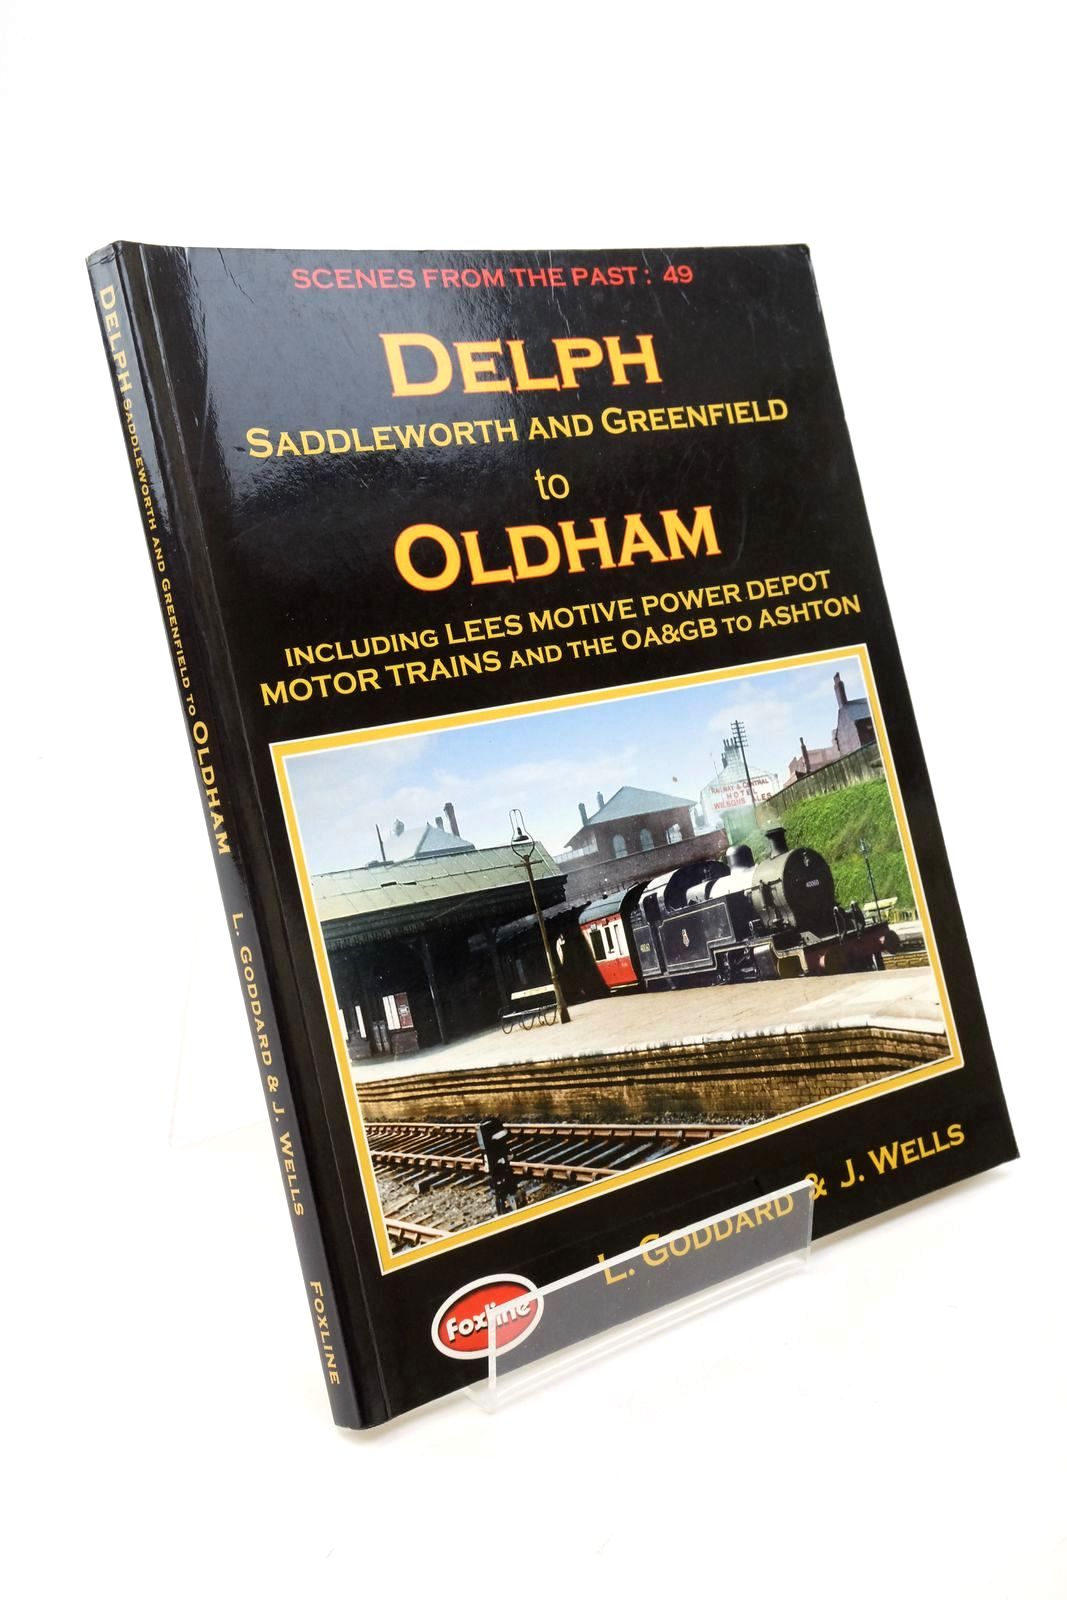 Photo of DELPH SADDLEWORTH AND GREENFIELD TO OLDHAM (SCENES FROM THE PAST: 49)- Stock Number: 1322473